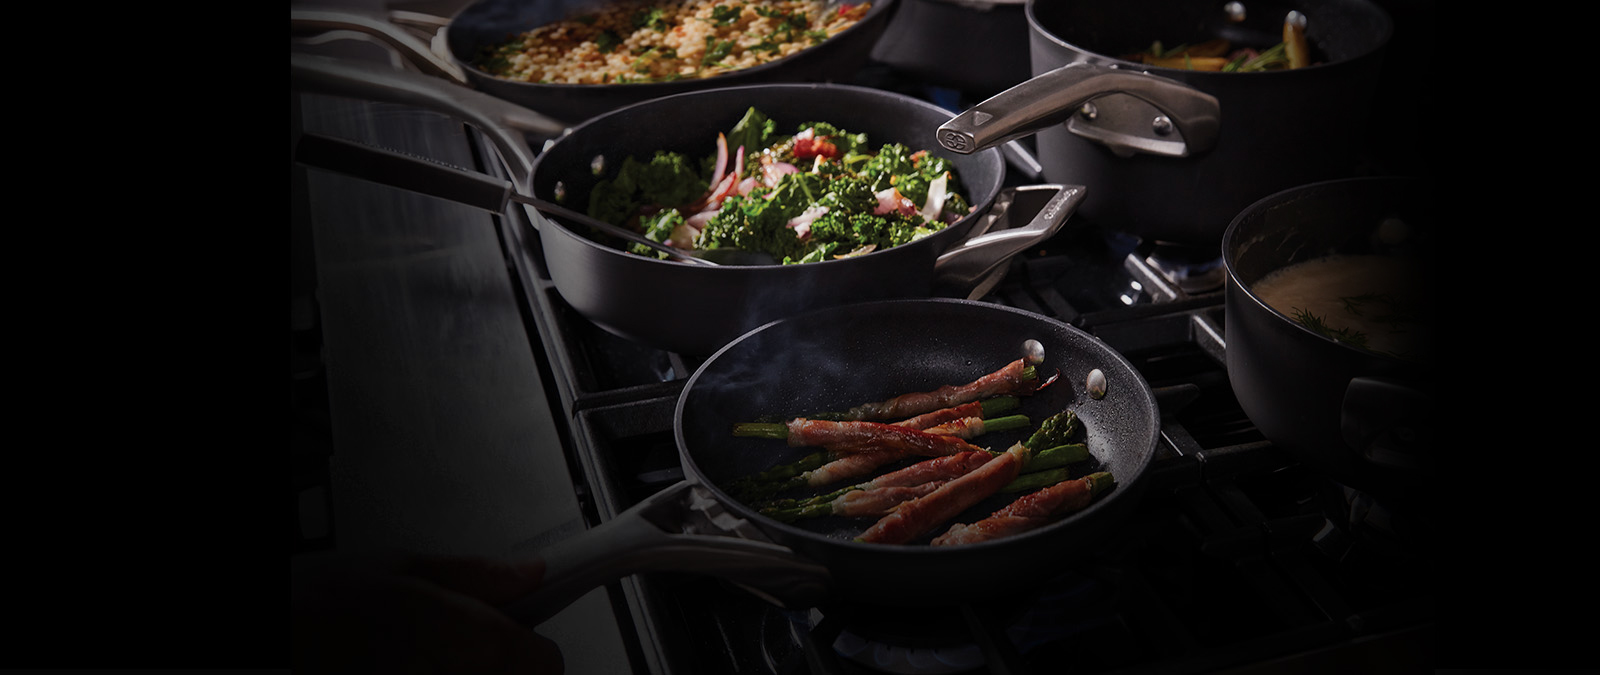 Cuisinel Versatile Convenient Pre Seasoned Cast Iron Skillet 3 Multi Sized  Cooking Pan Set with 8, 10, and 12 Inch Pans and 3 Multi Sized Lids